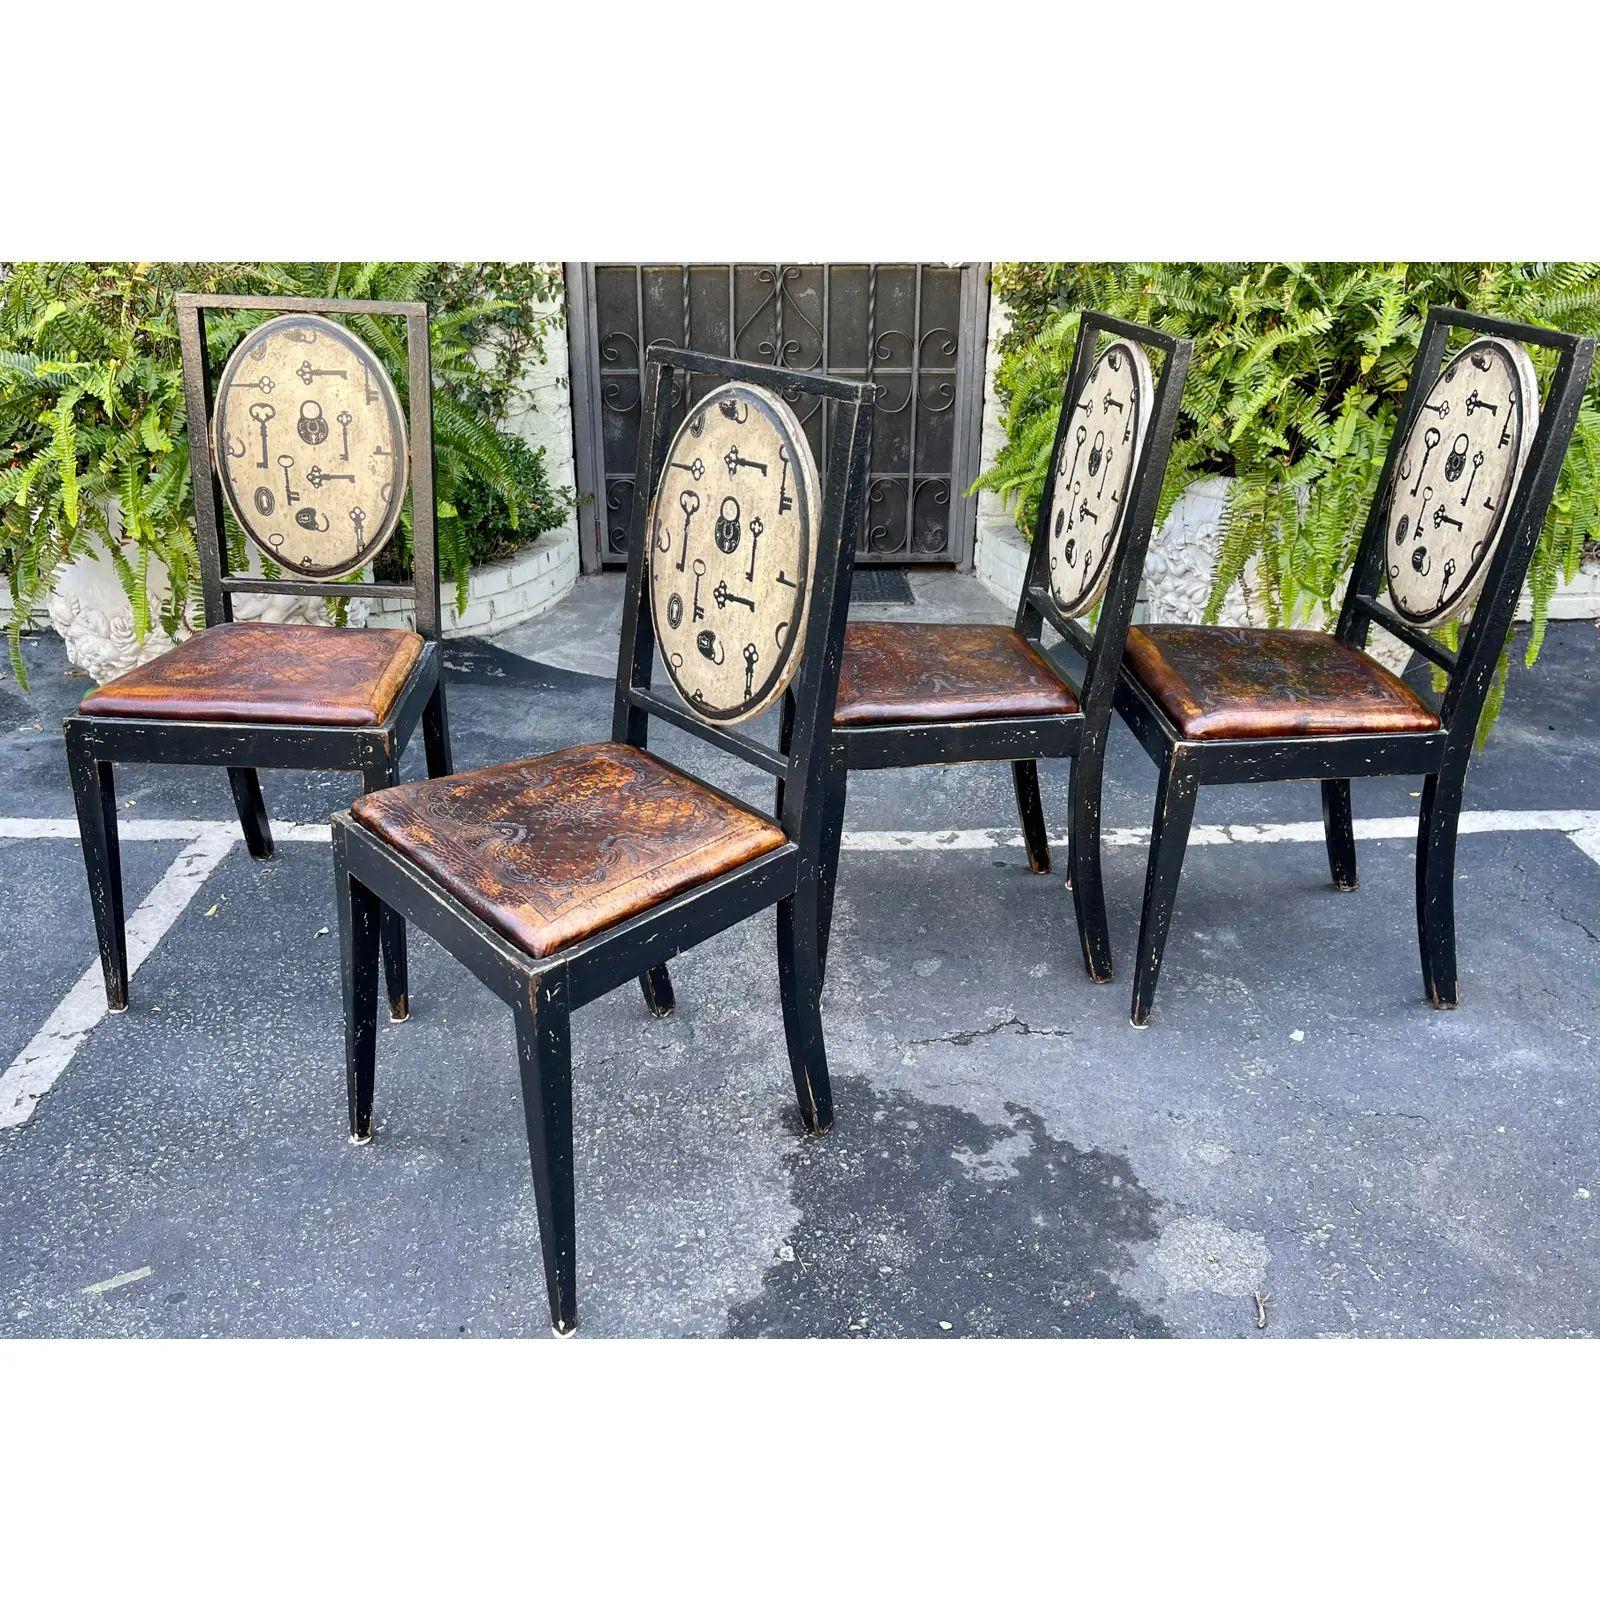 Spanish Colonial Set of 4 Equator Furniture Company Rustic Tooled Leather Painted Chair, 1990s For Sale